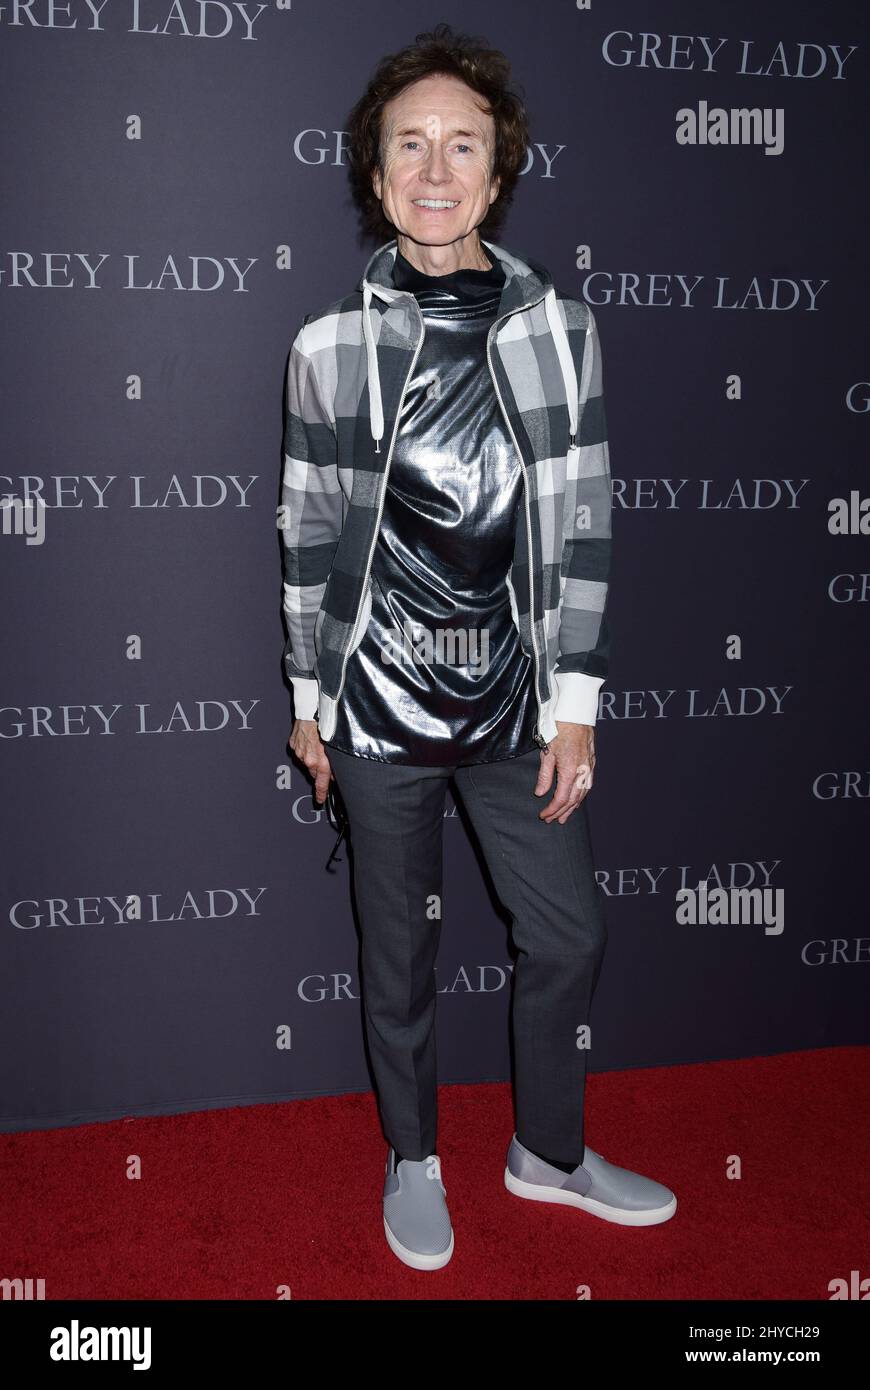 G Tom Mac arriving for the 'Grey Lady' Premiere held at the Landmark Theater Westside Pavilion, Los Angeles on April 26, 2017 Stock Photo